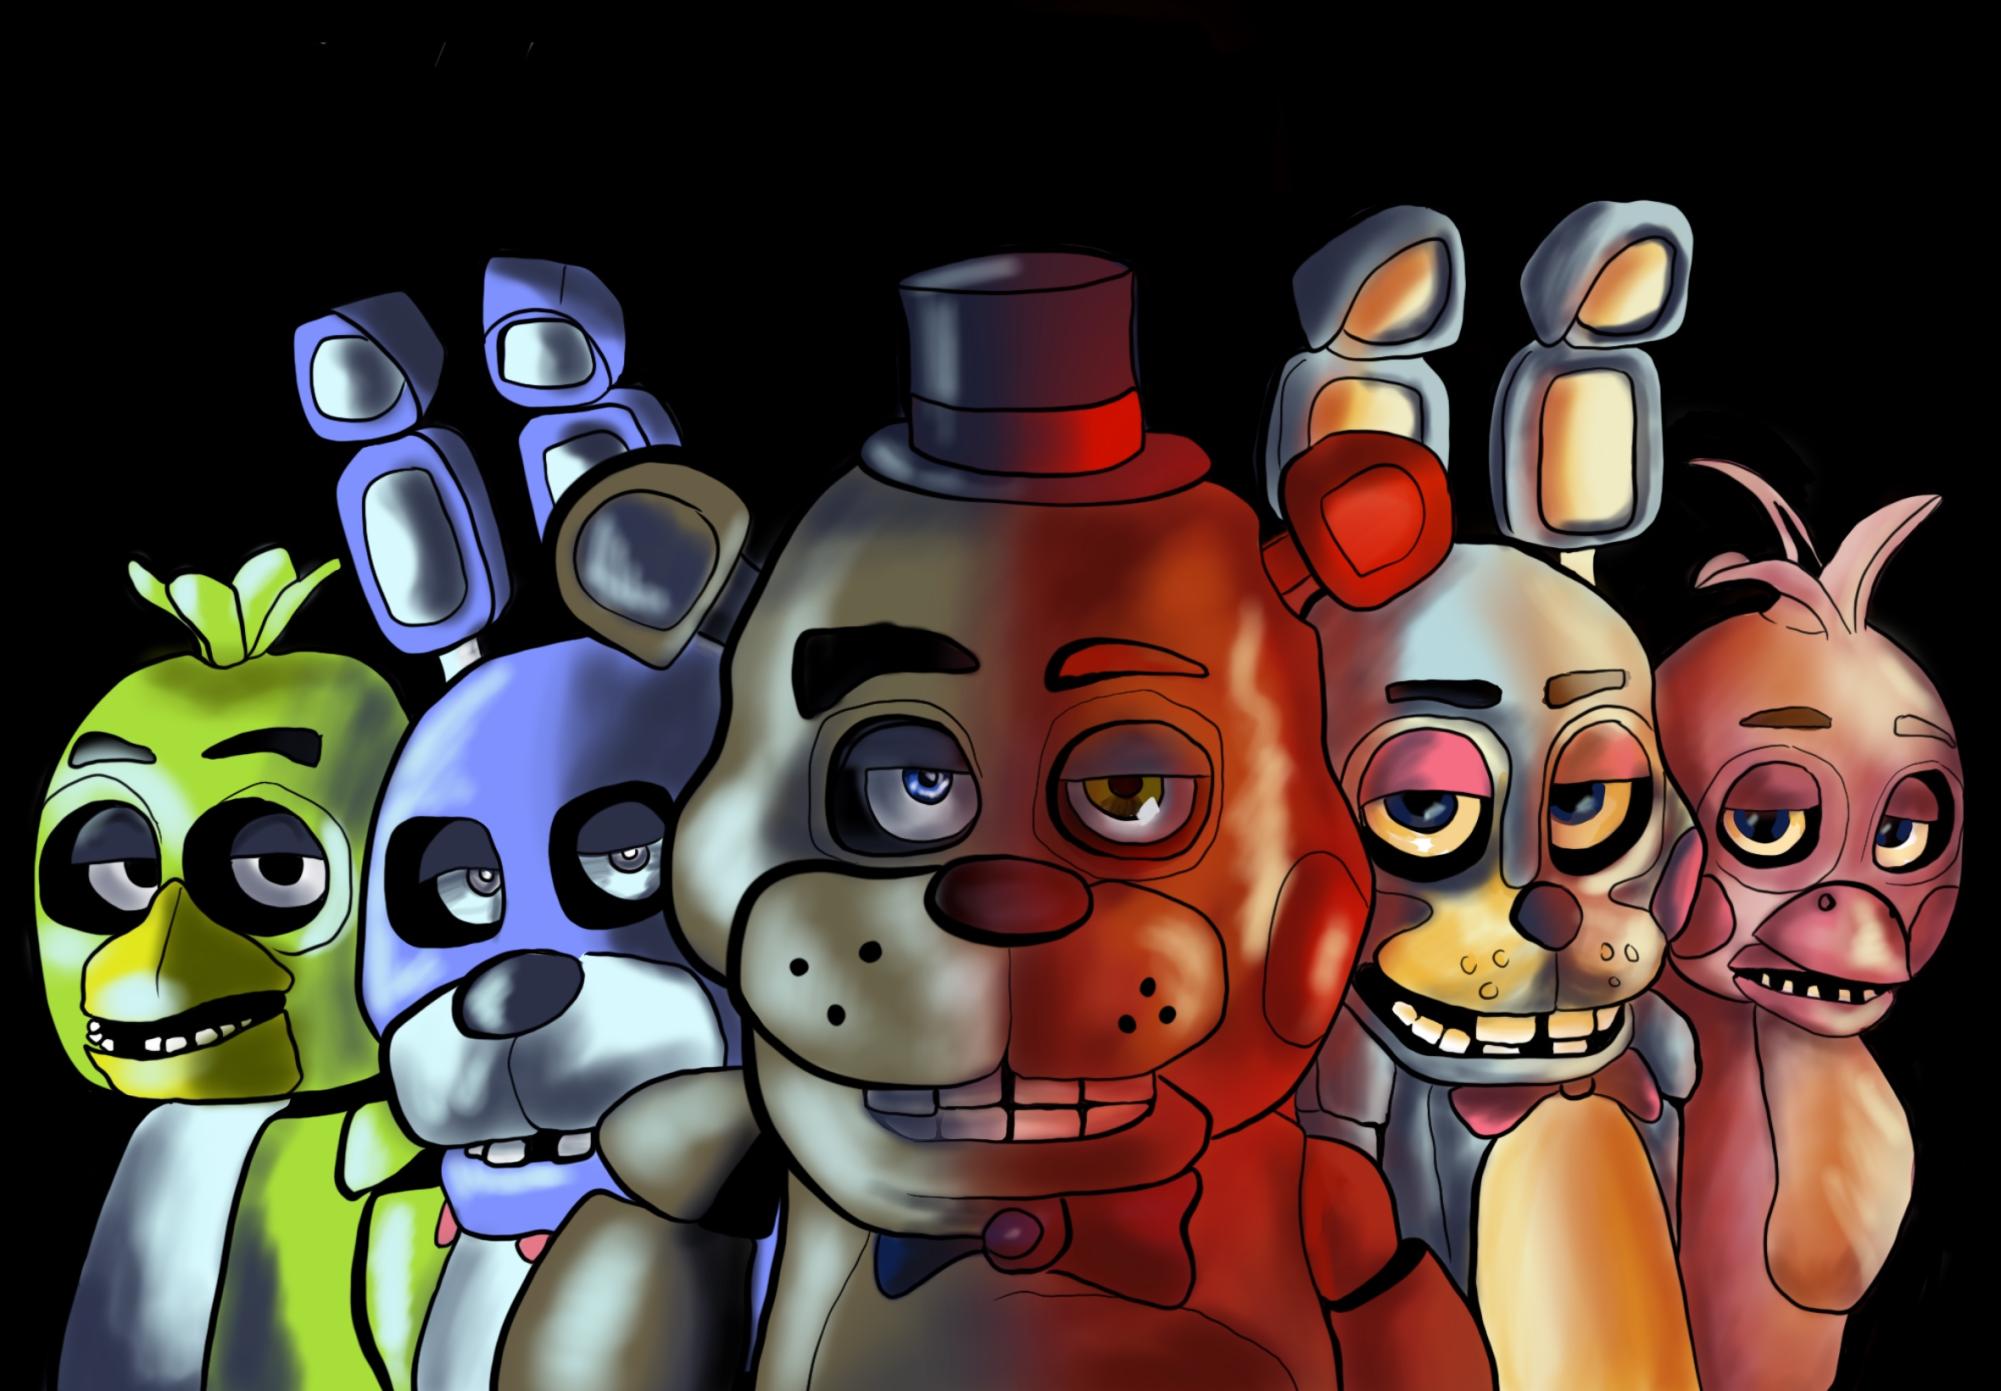 Since that the FNAF 2 movie is currently in development, what is